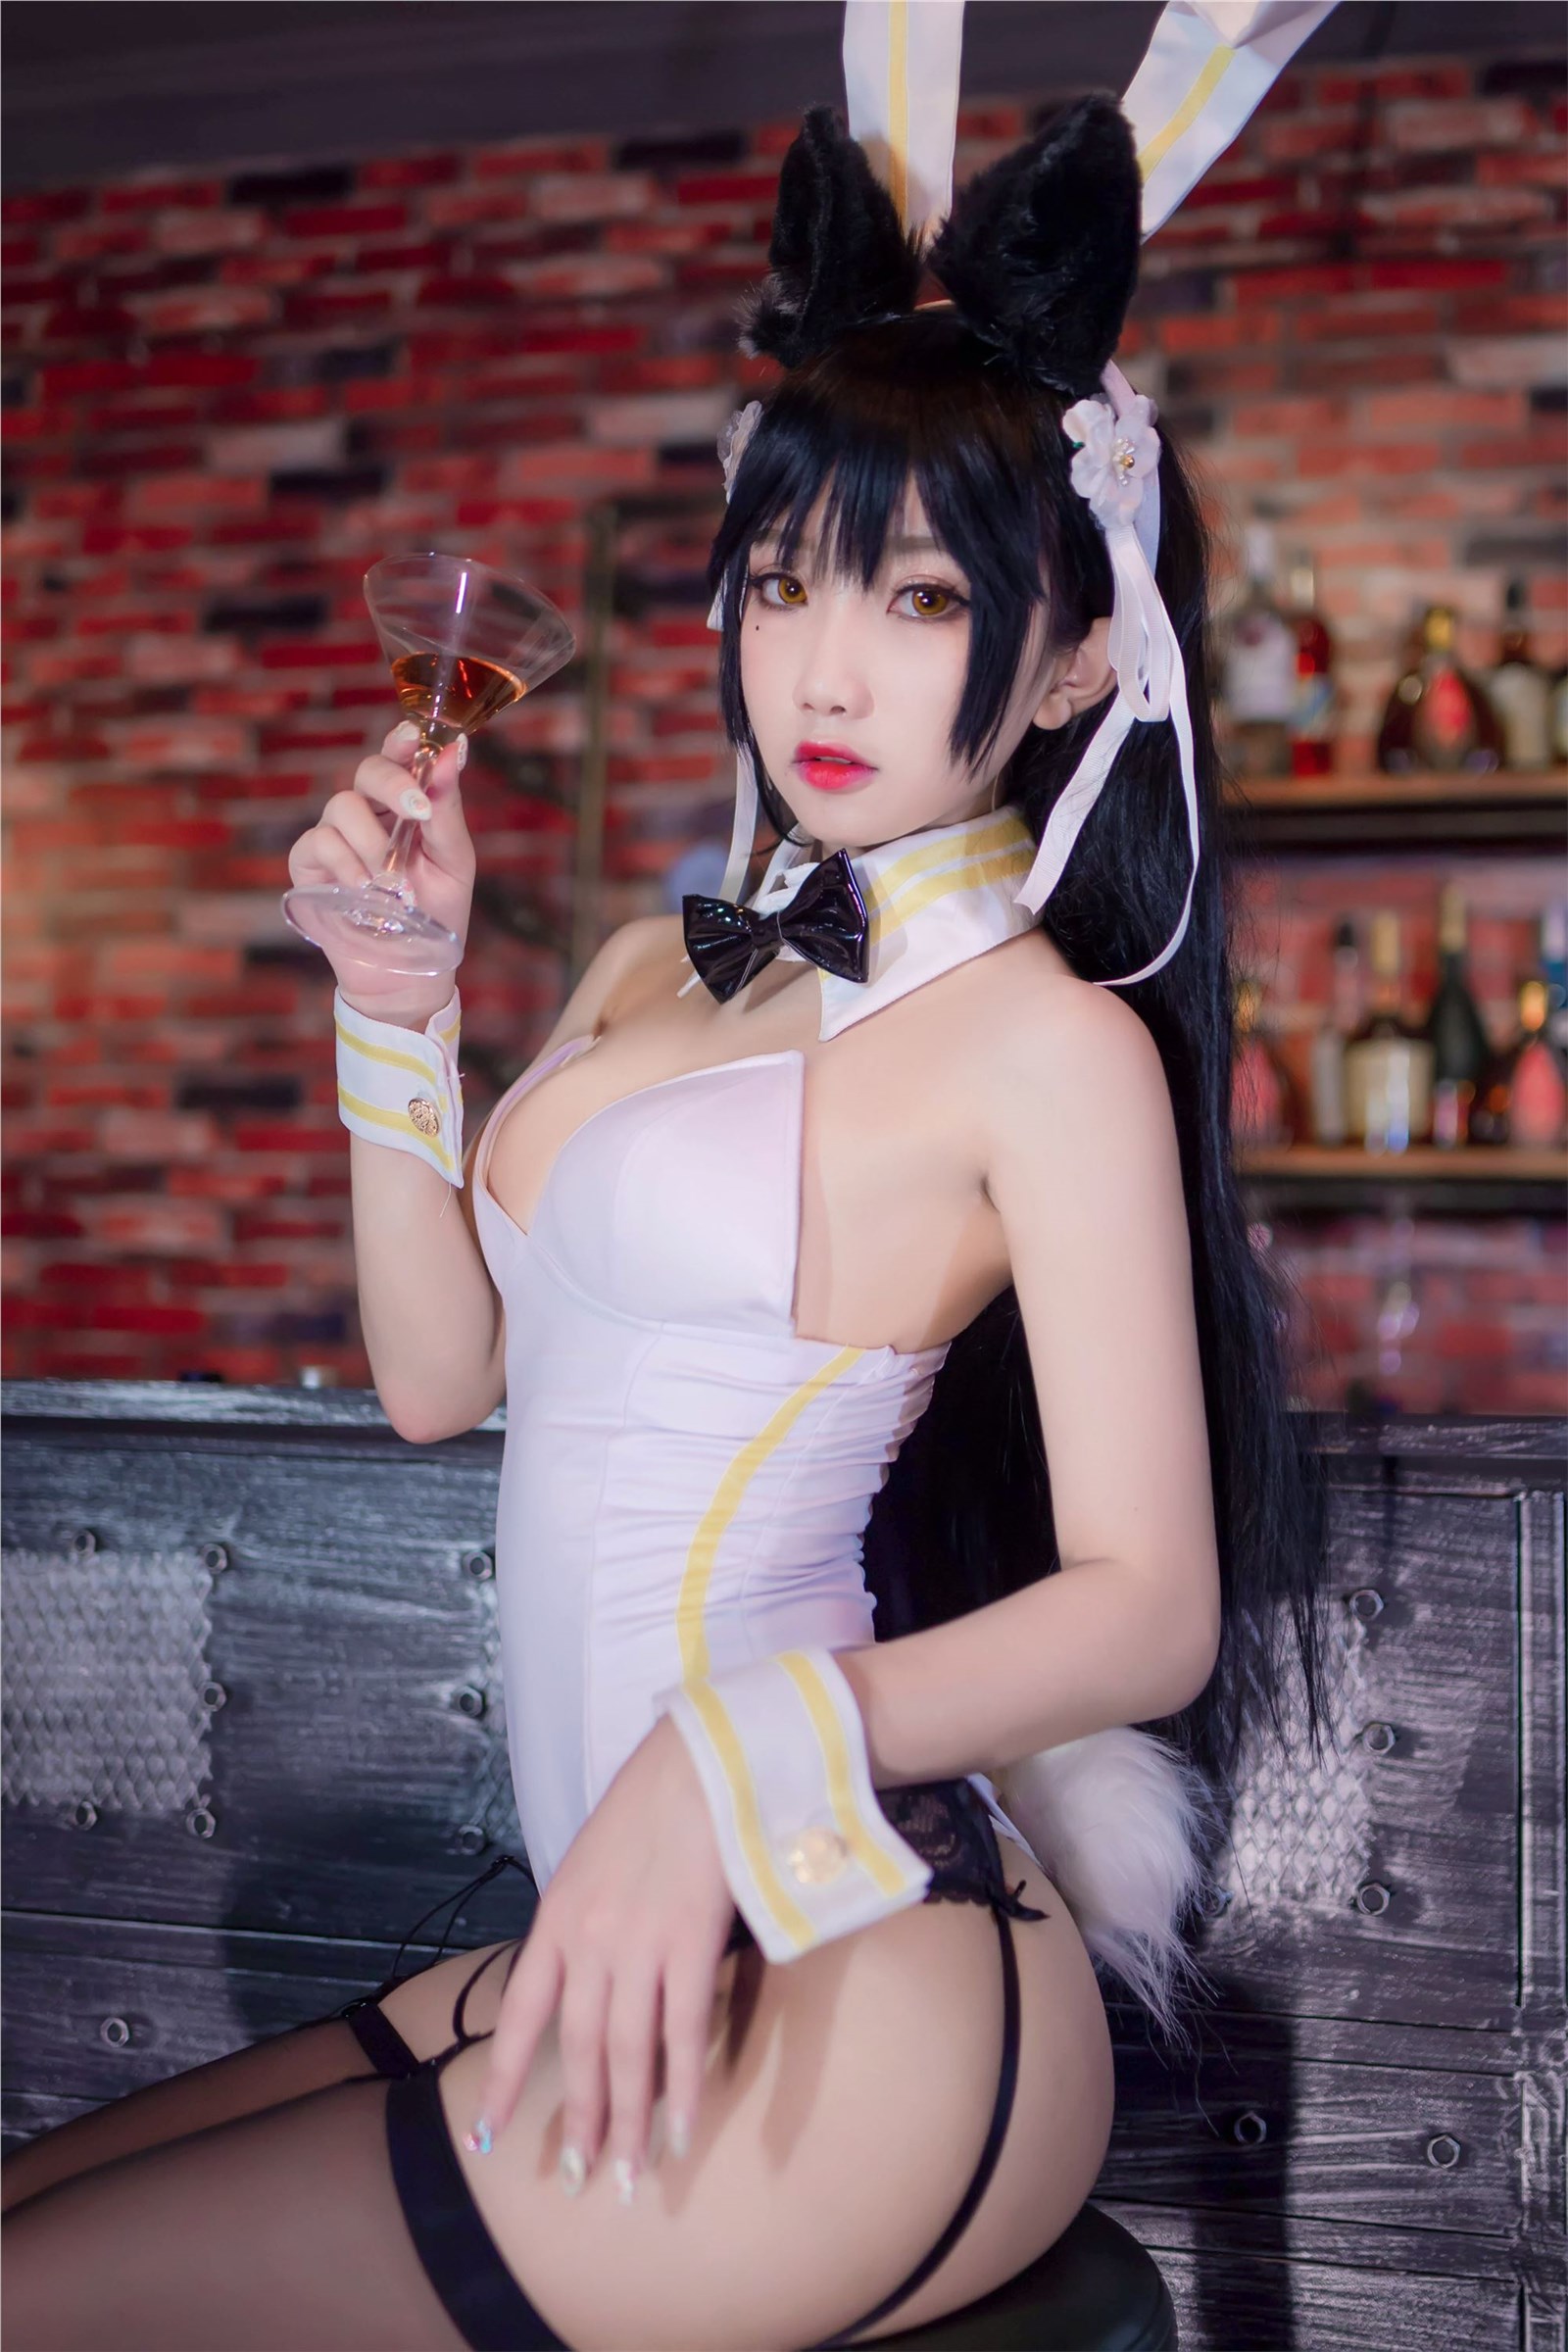 Cosplay is Yao in or not - bar Bunny(16)